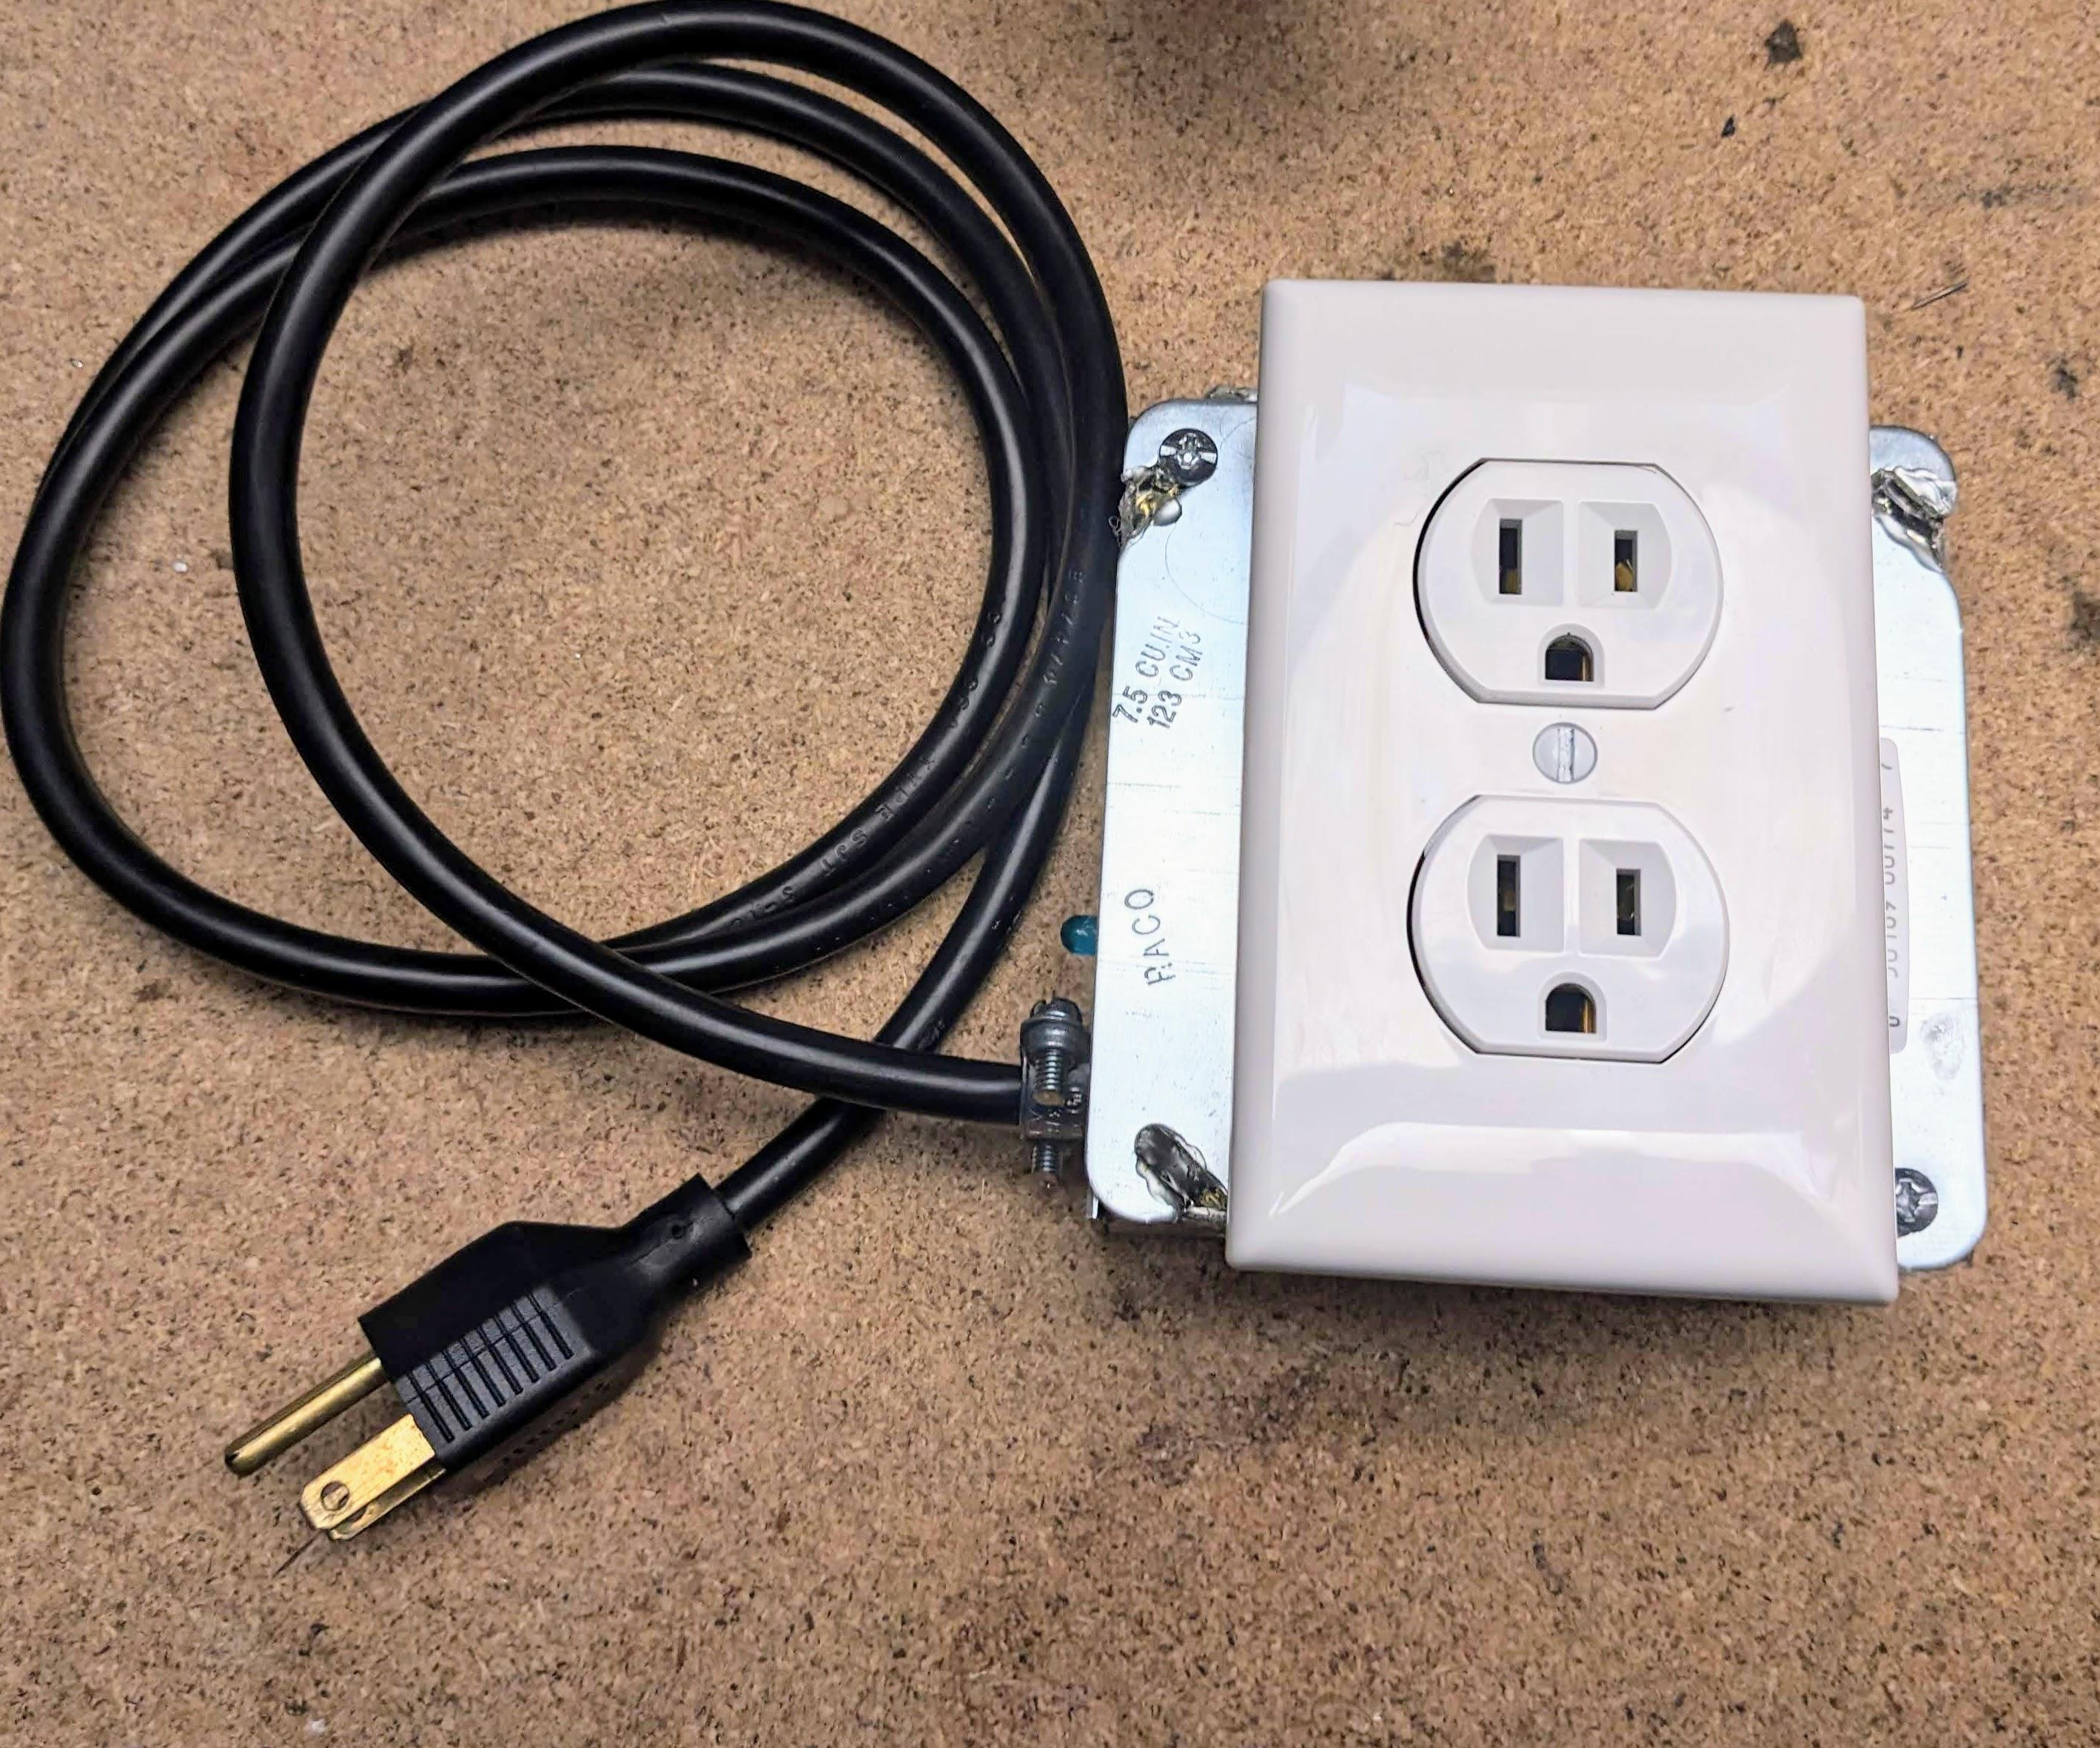 WiFi Enabled Outlet With Optional Temperature Control Automation (TempBuddy Control)